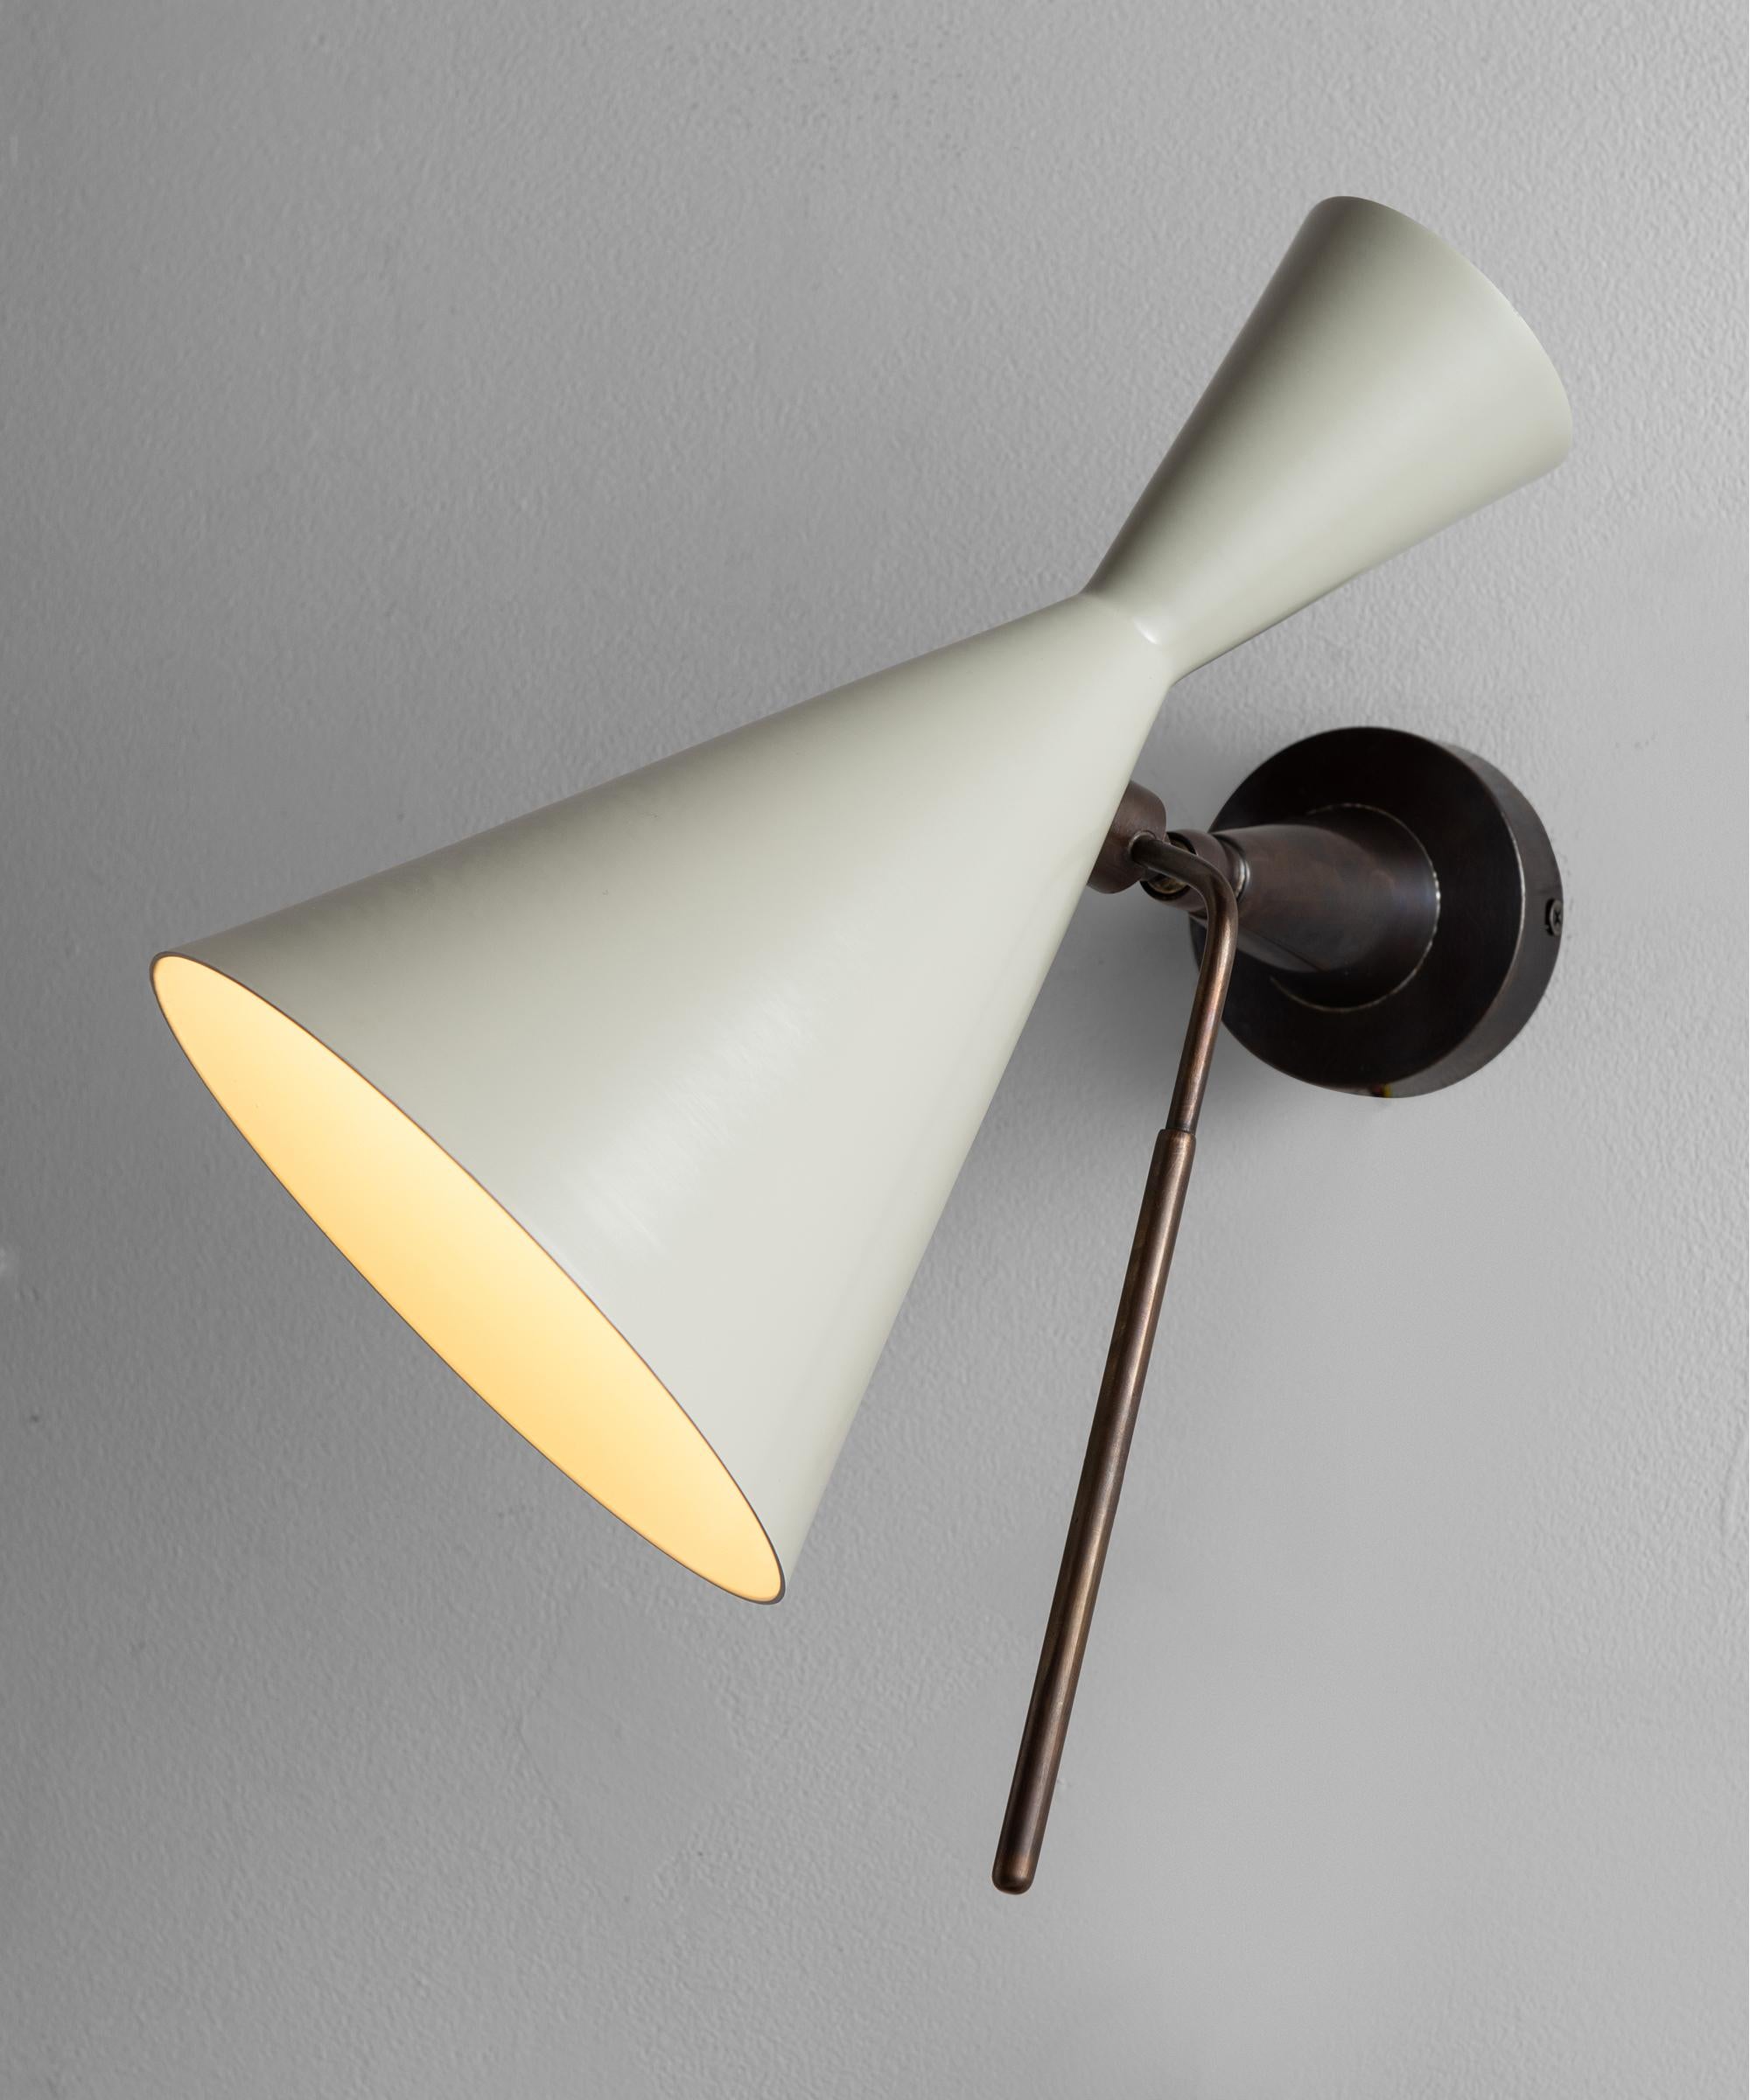 Pivotal metal shade with brass arm. 

Made in Italy 

Measures: 6.5